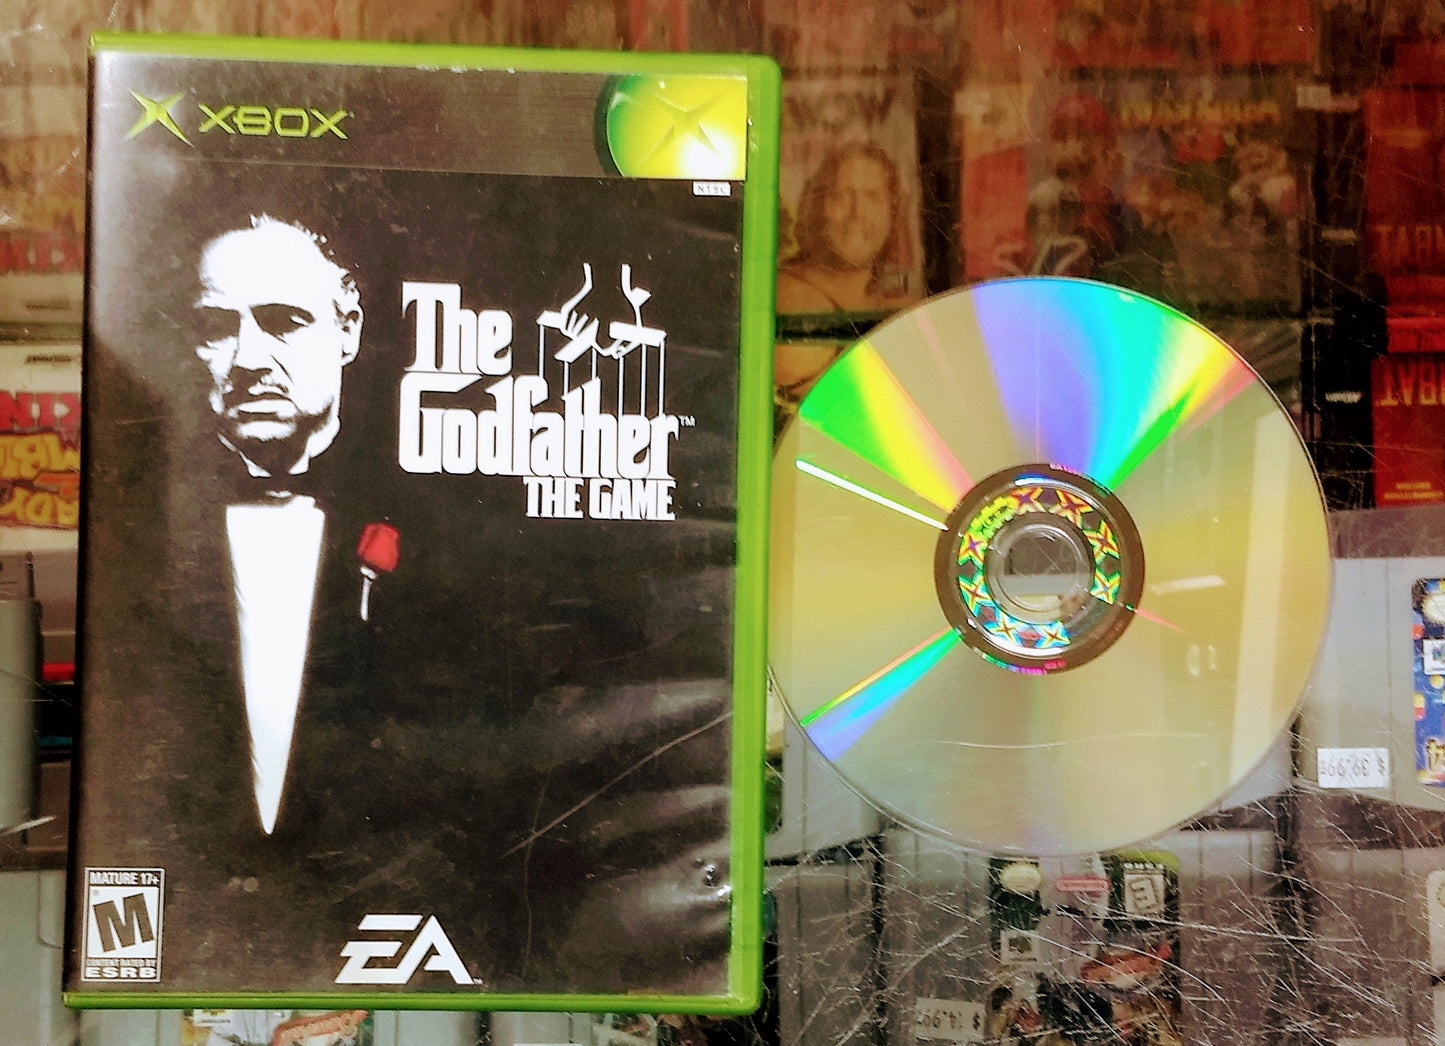 THE GODFATHER (XBOX) - jeux video game-x